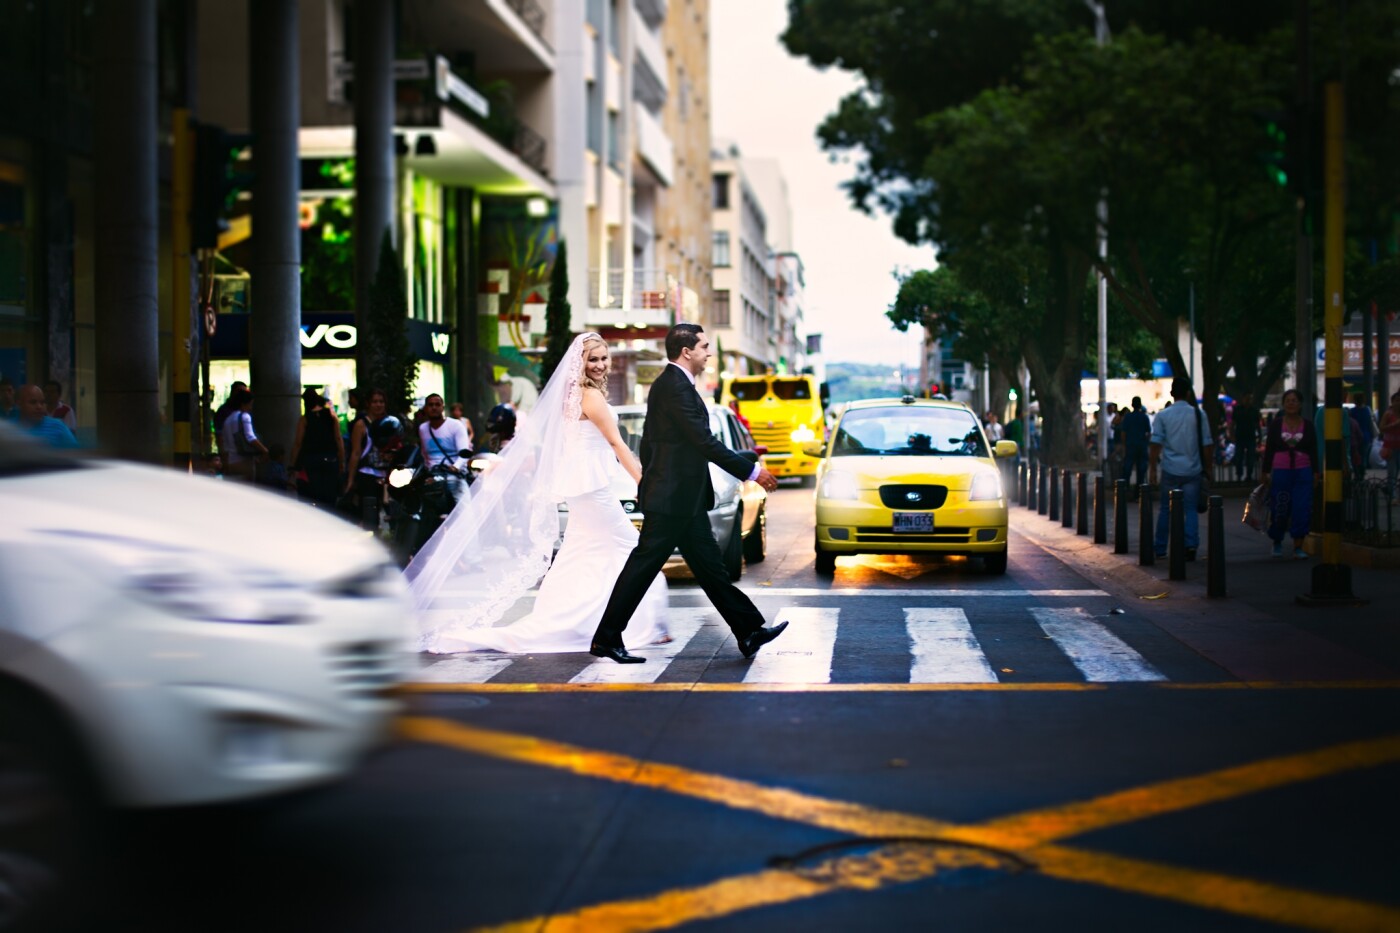 I made this picture in one of the most important streets of downtown in my city Pereira, it is located 318 km from the Capitol of Colombia Bogotá.<br />
I asked the bride Luz Andrea and the groom Albeiro to please stand on one side of the traffic light and when the light permitted for the street walkers to pass the street, to please walk across it and for the bride to see towards the center of the street where I was located with my camera.<br />
This picture had to be done the faster way possible because I was in the middle of the street and I was stopping and complicating the traffic of this part of downtown . I wanted to do this picture because it's a place very famed and noticed to me and all the people of my region